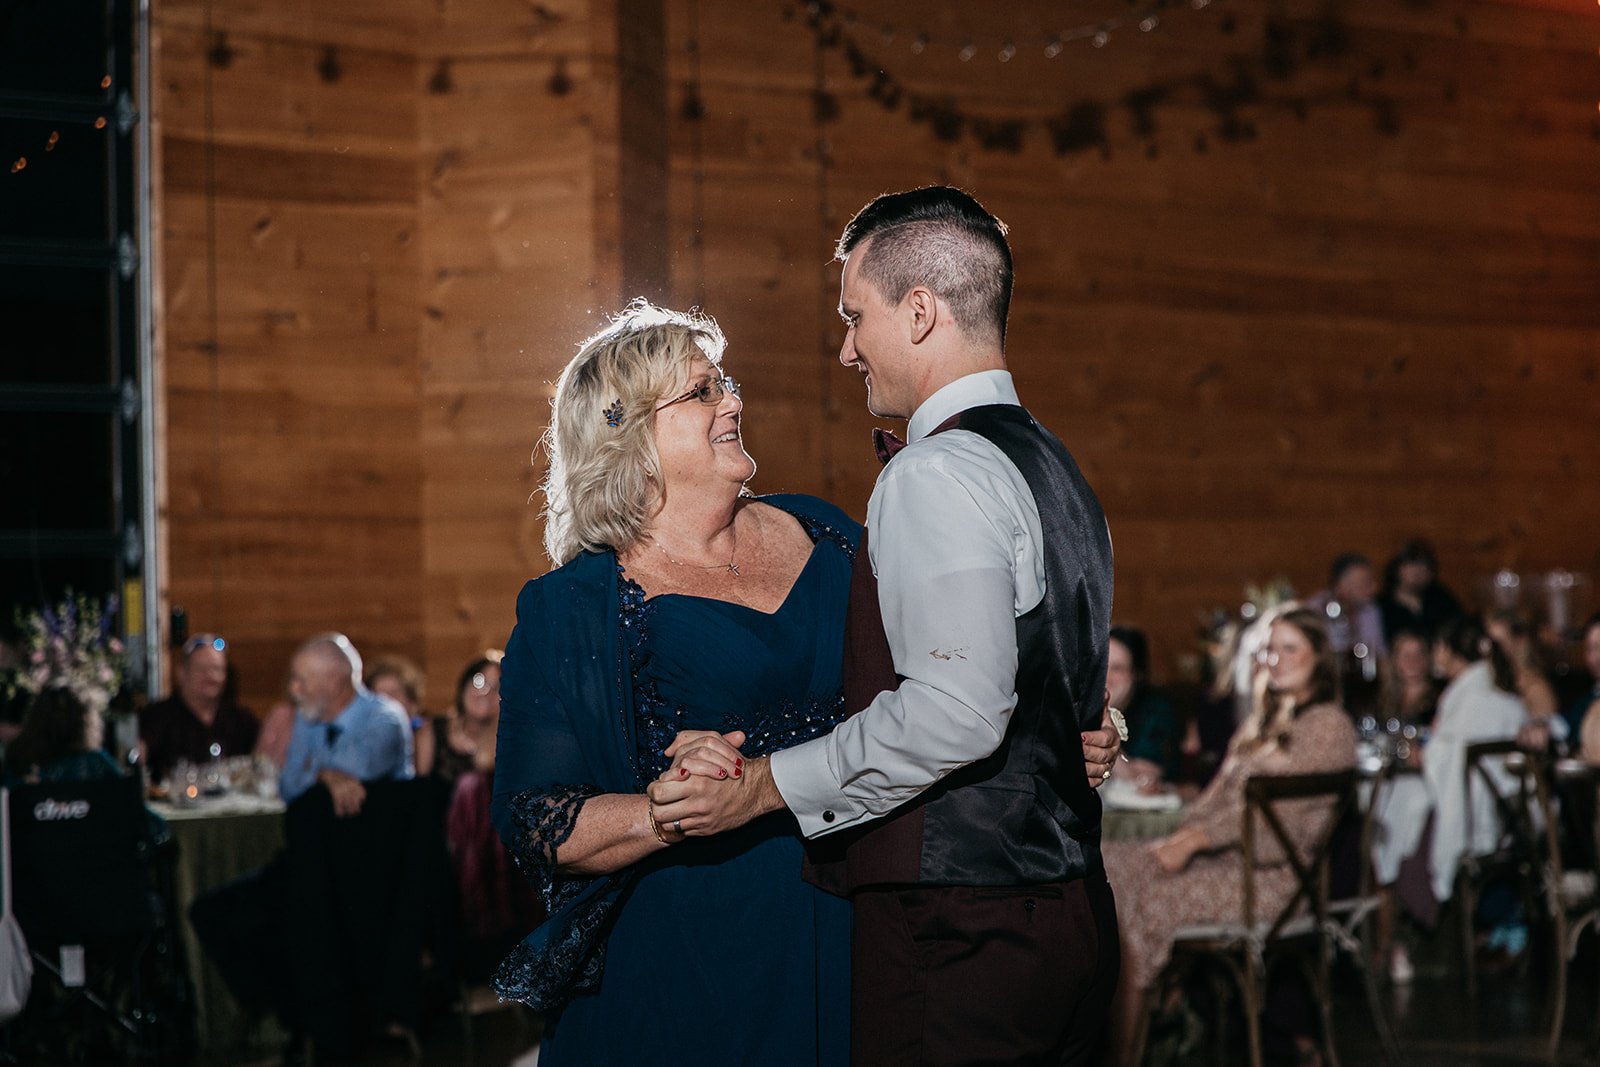 A mother son dance during the reception.